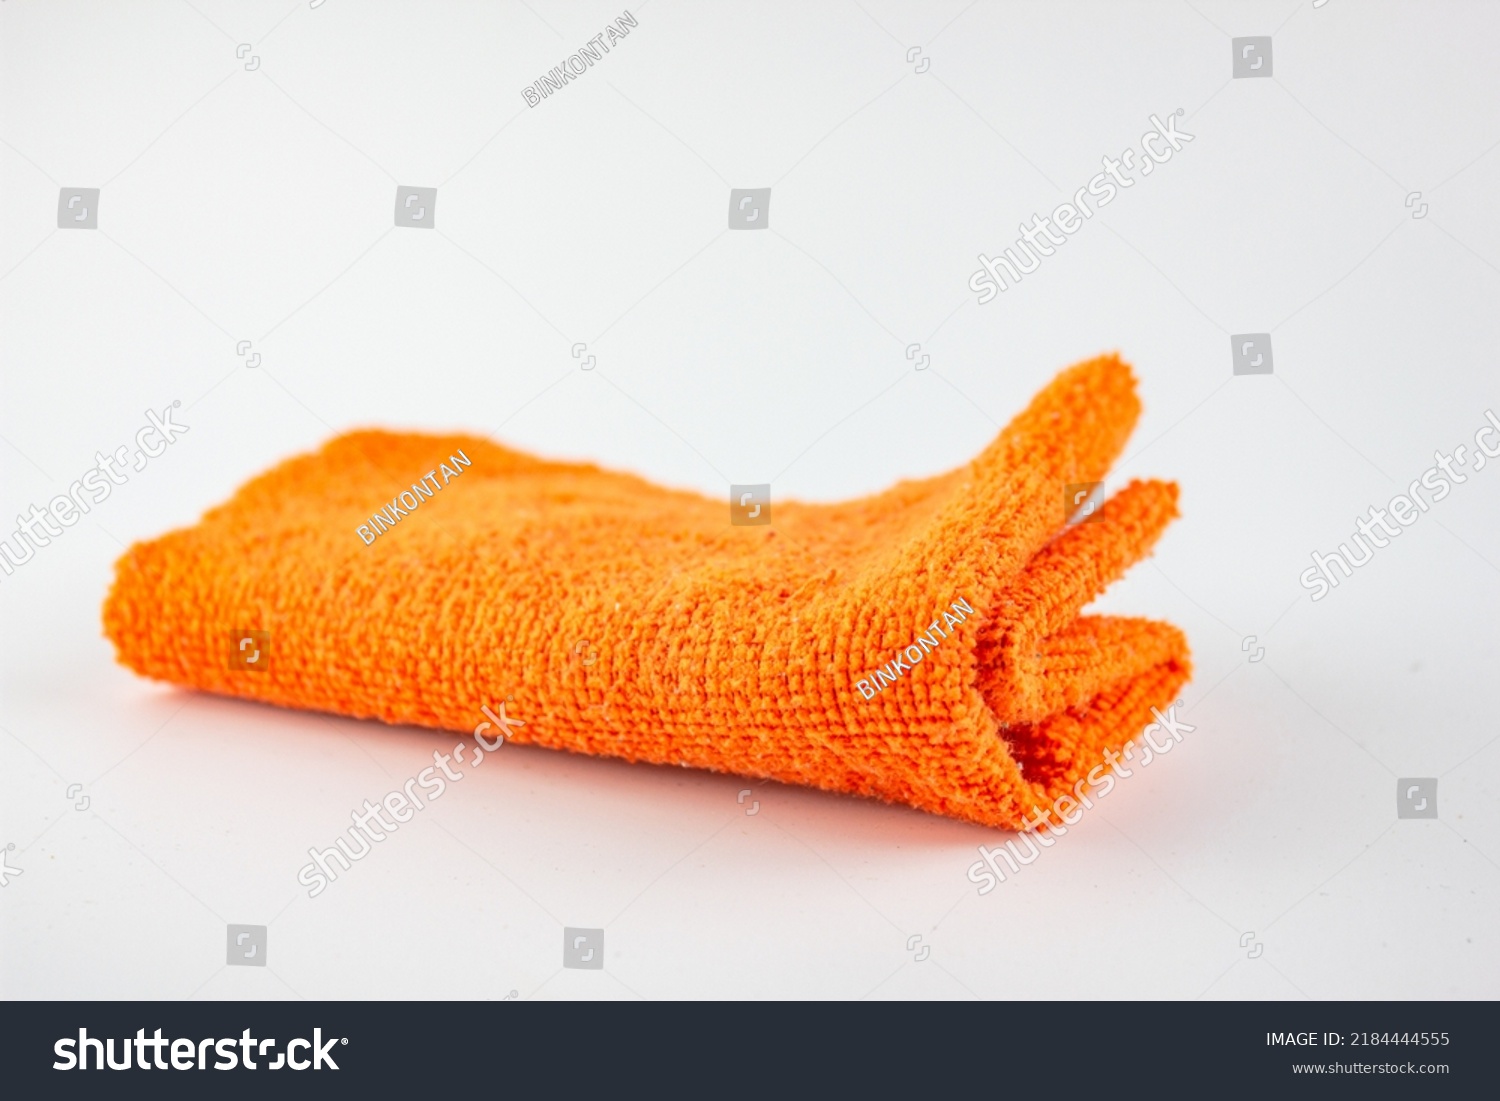 The Fiber cloth for cleaning. Rag for cleaning dust.Orange rag on a white background. #2184444555